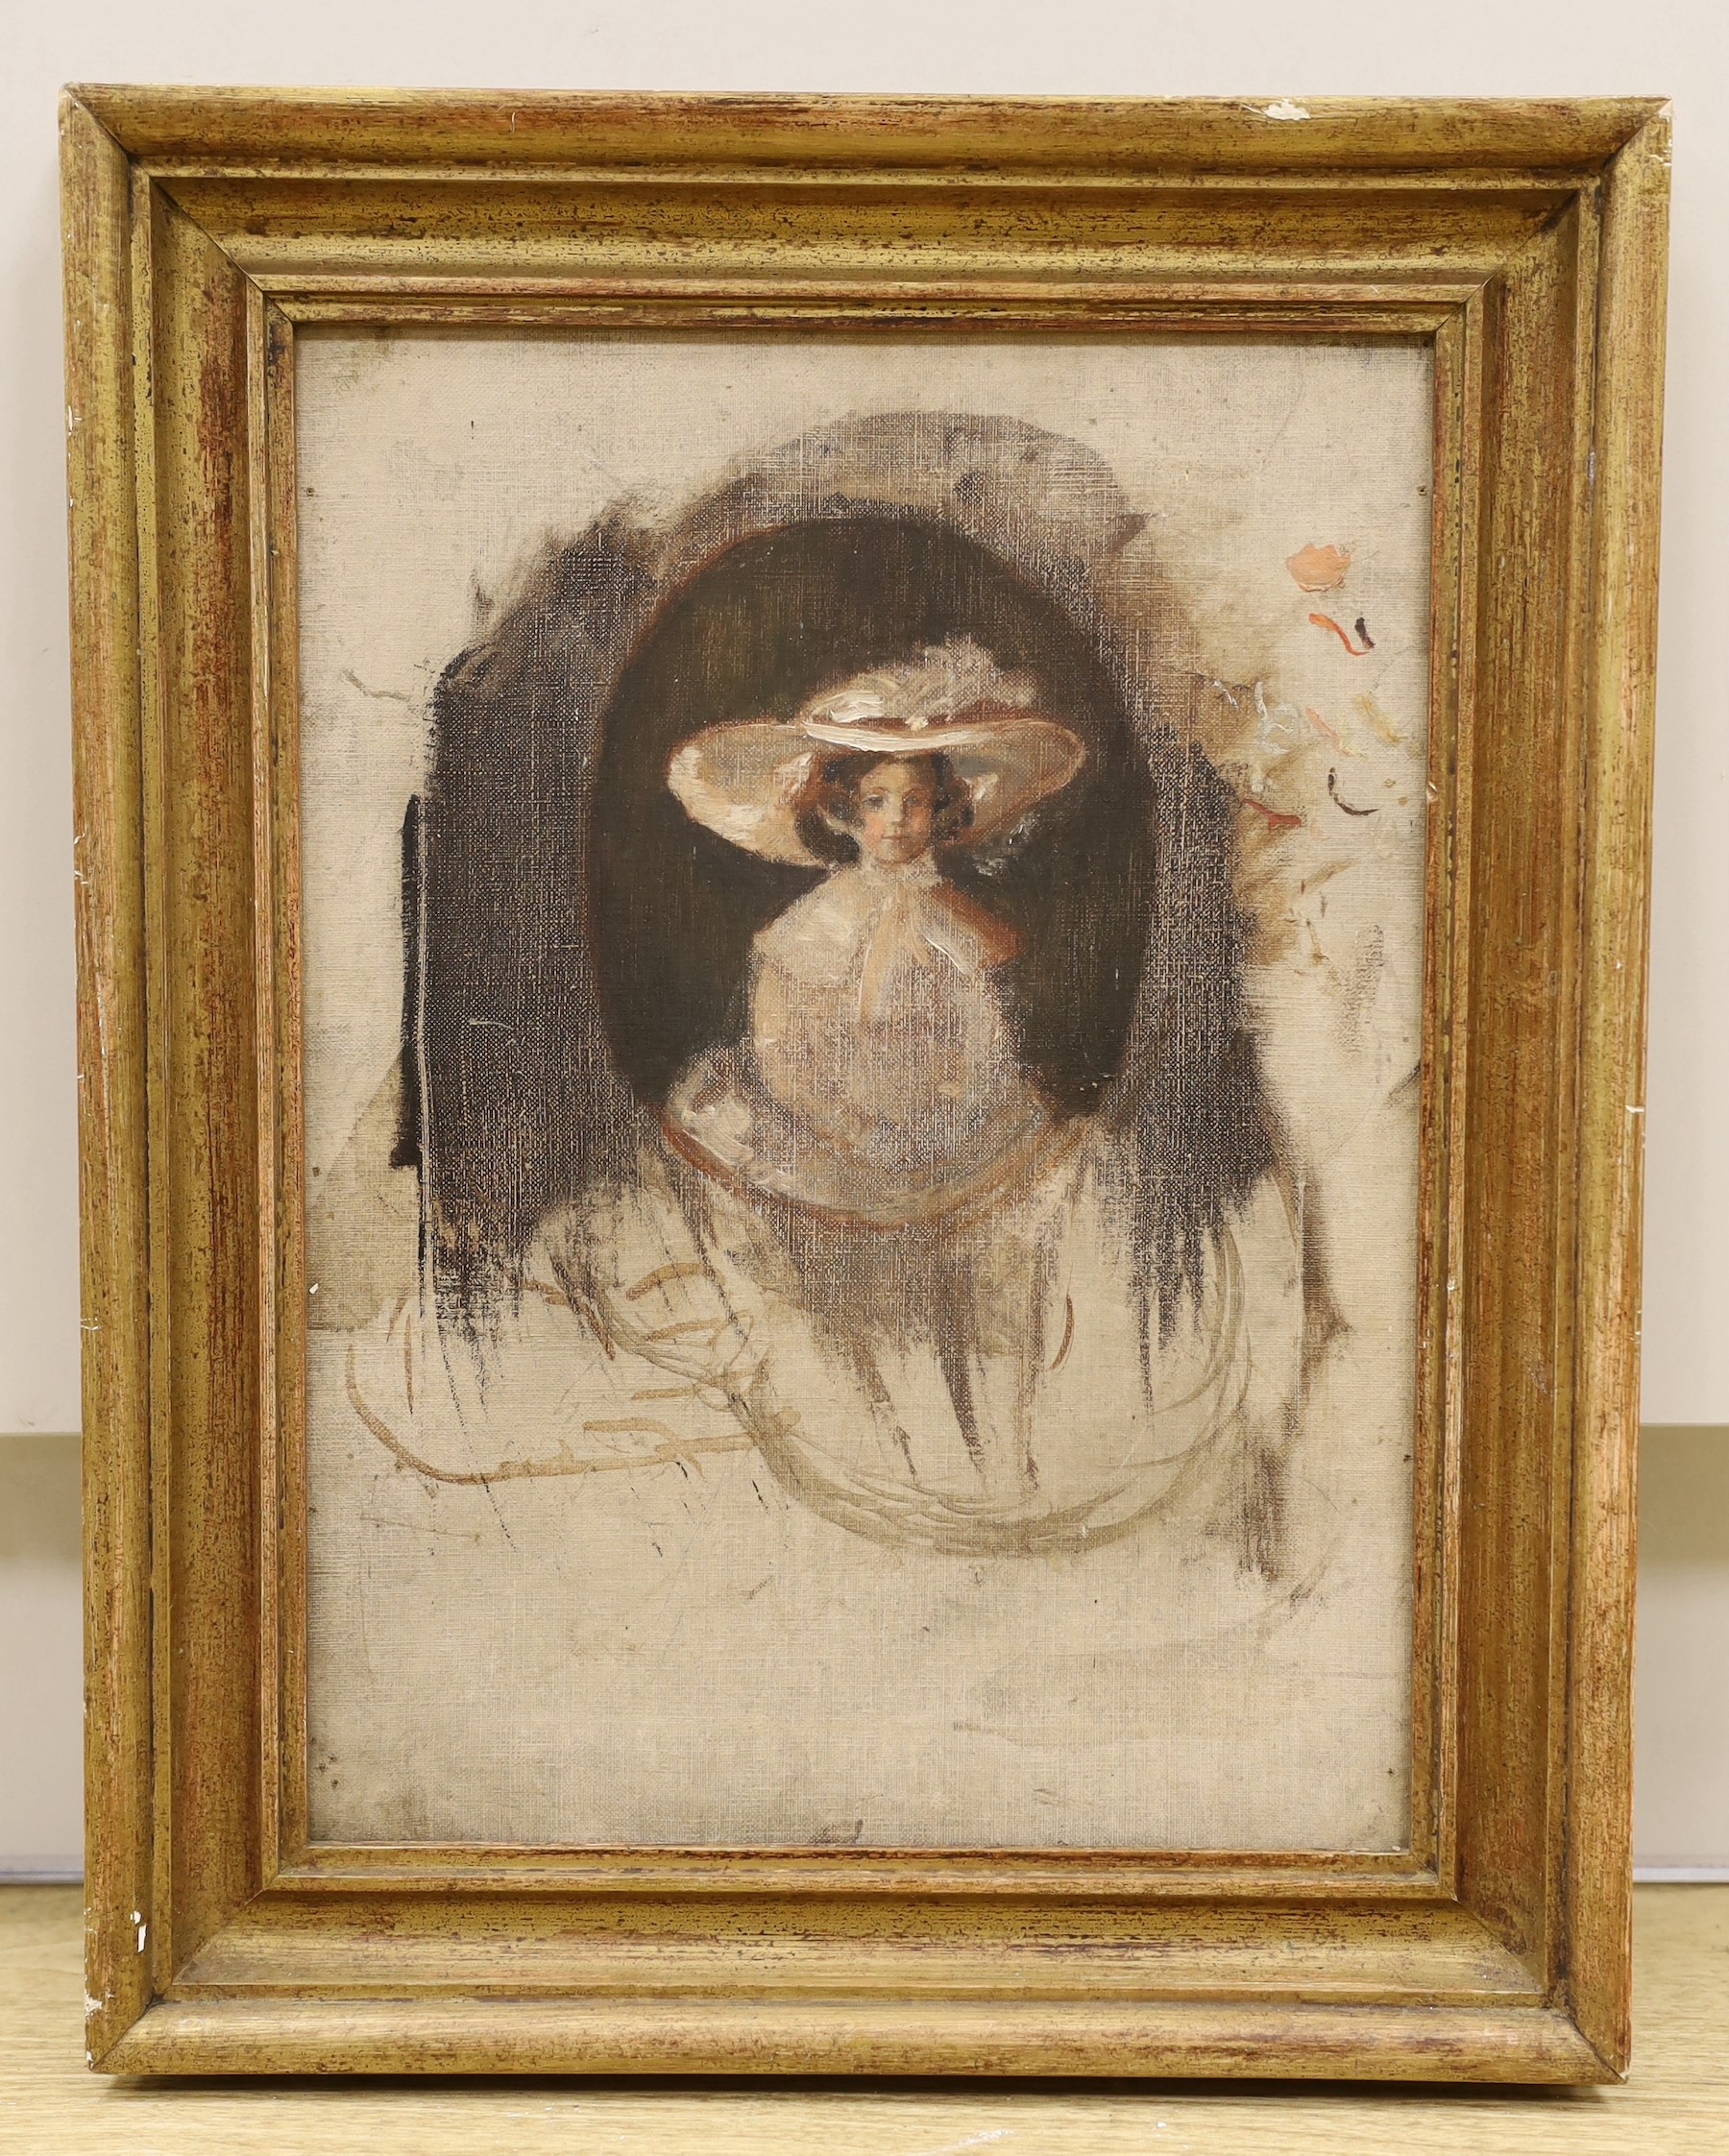 Late 19th century English School, oil on canvas, Sketch of a girl in a mirror, 39 x 29cm